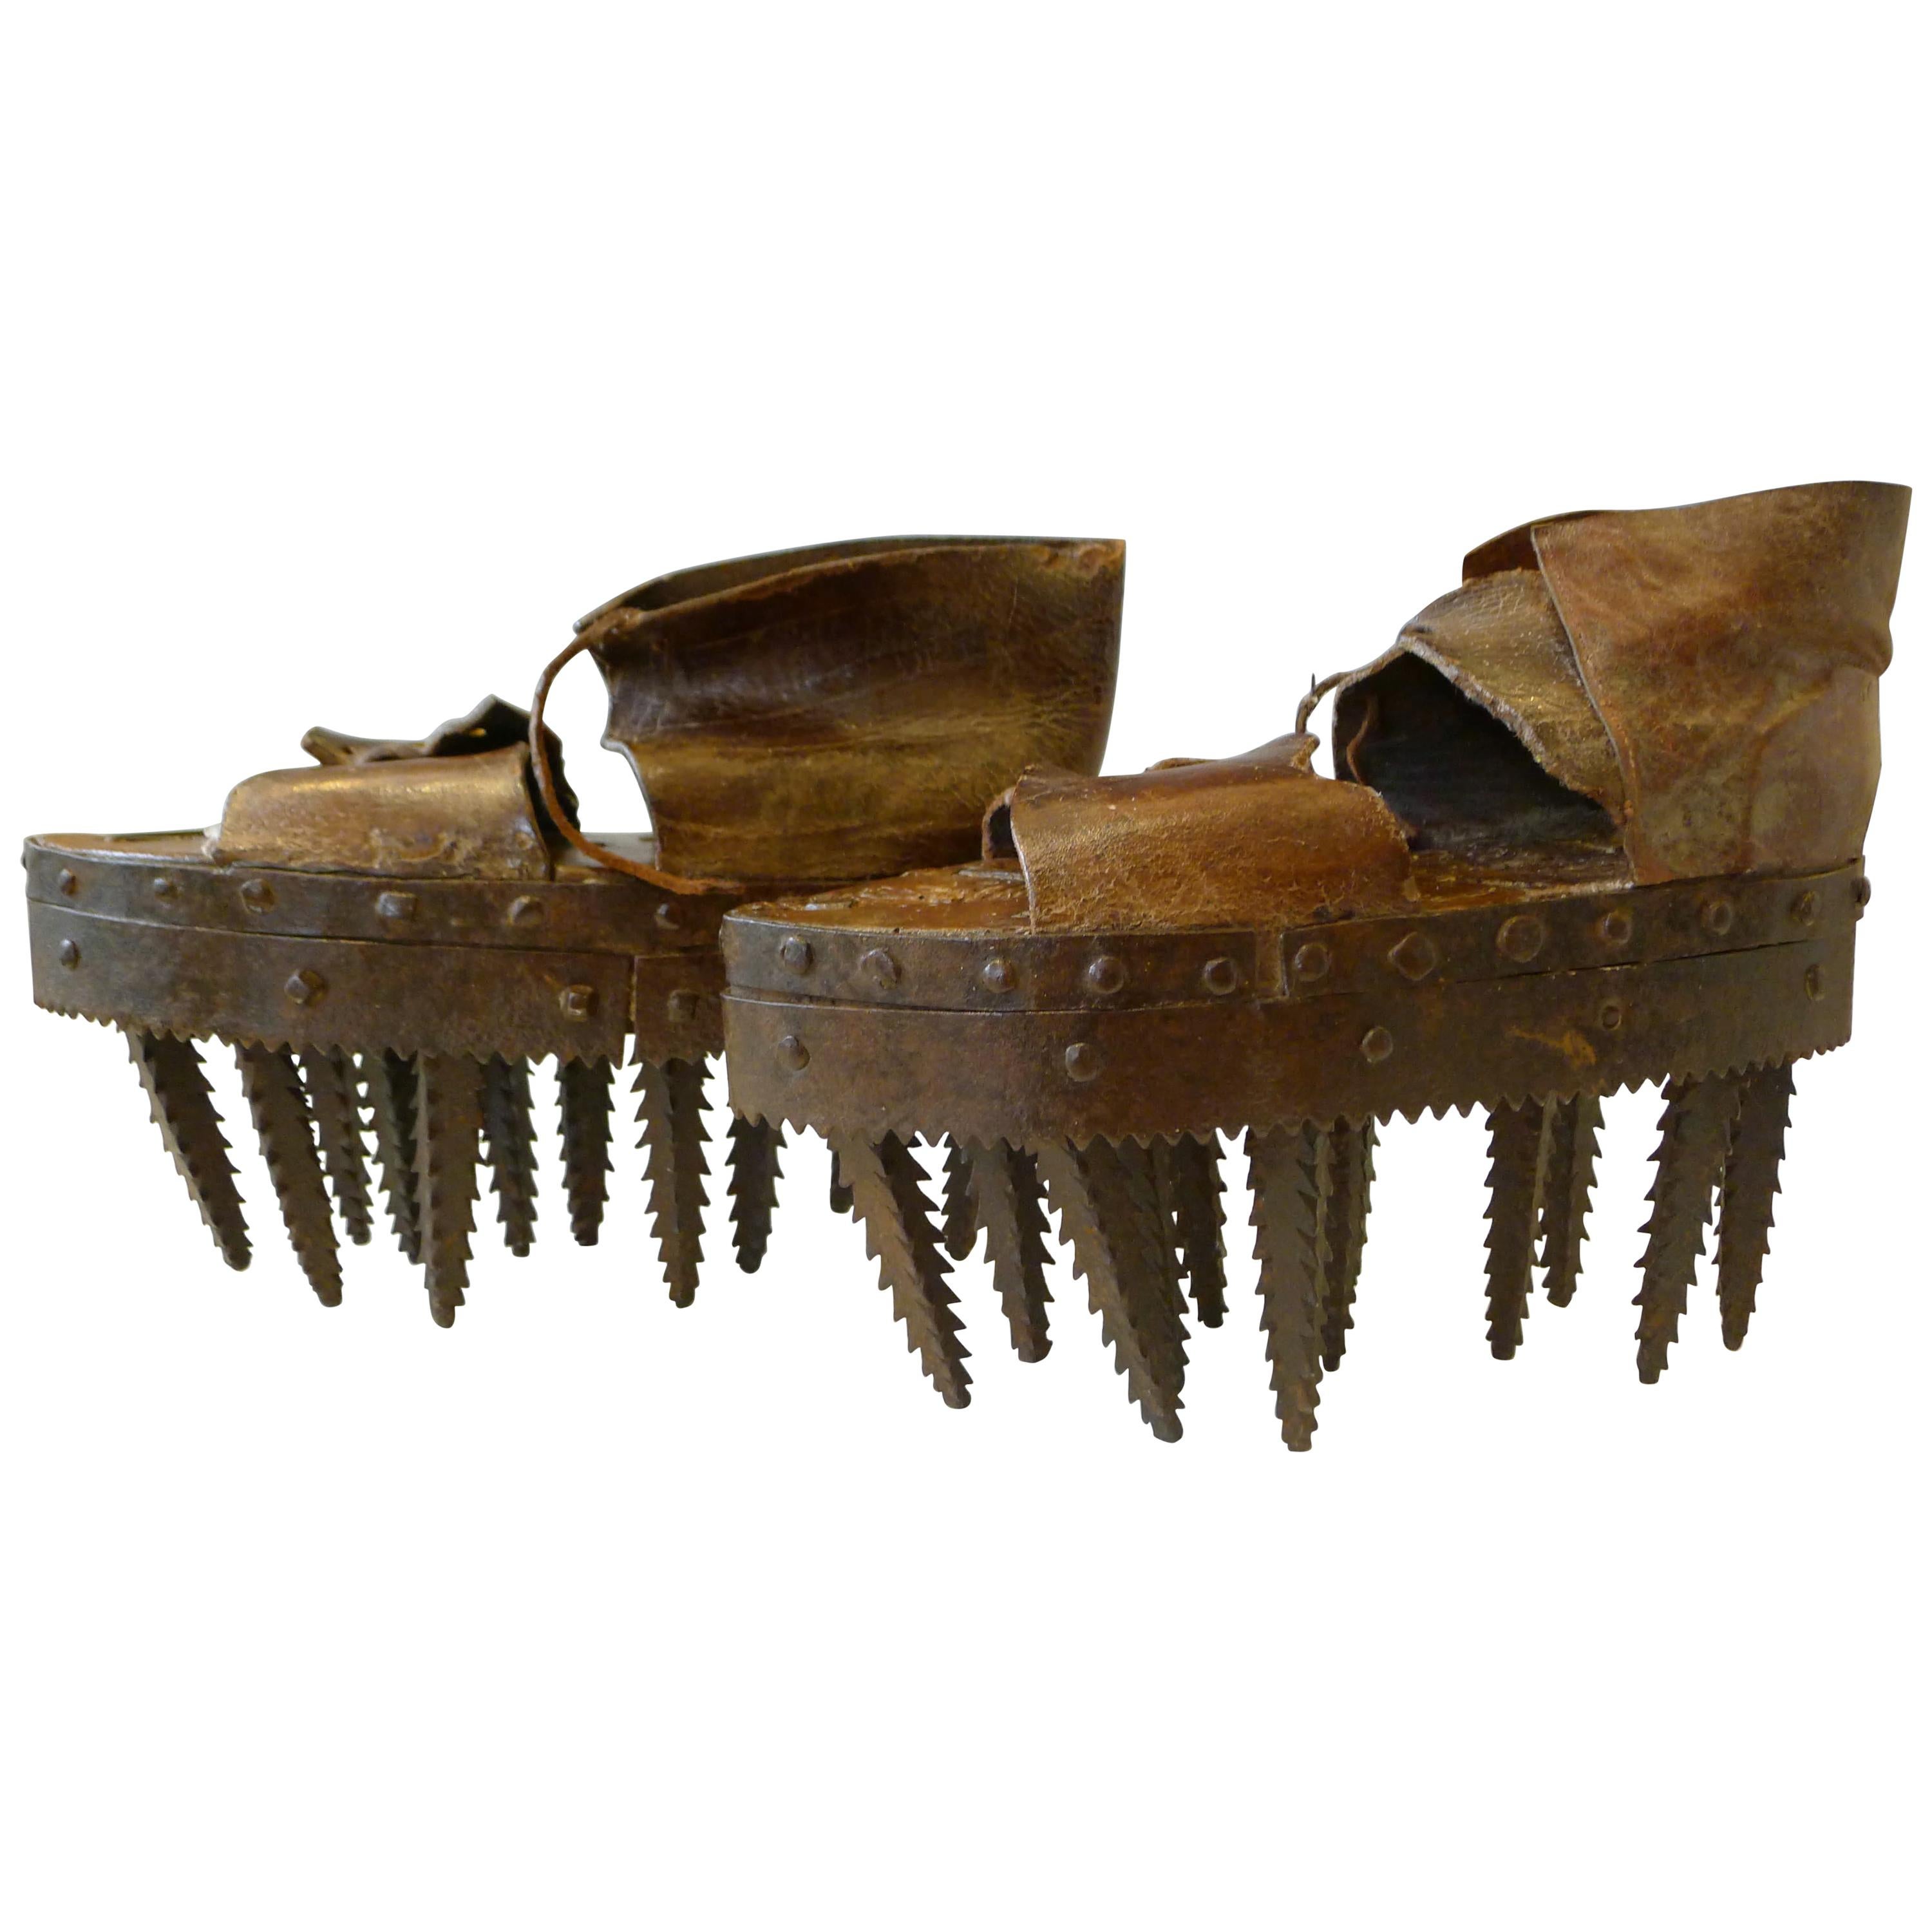 Incredible Shoes to Break Sweet Chestnuts, 19th Century at 1stDibs